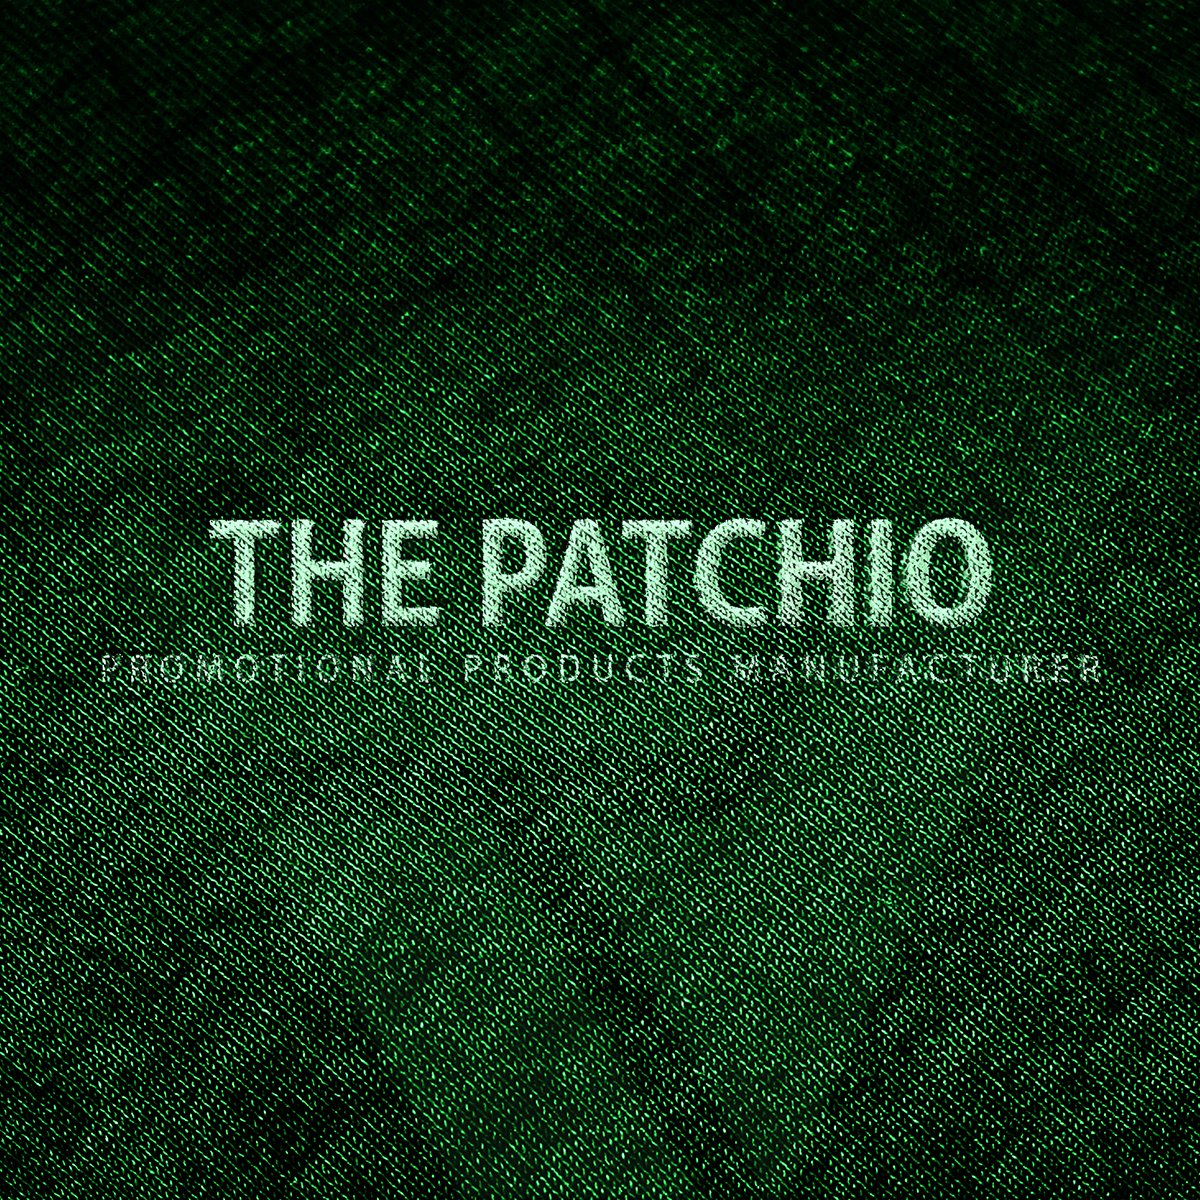 🔥 Custom patches that make a statement! 😍🧵✨

Discover the endless possibilities with The Patchio.

trustpilot.com/review/thepatc…

#ThePatchio #CustomPatches #CustomerReviews #trustpilotreview #pvcpatches #patchesandpinexpo #connecticutbusinessowner